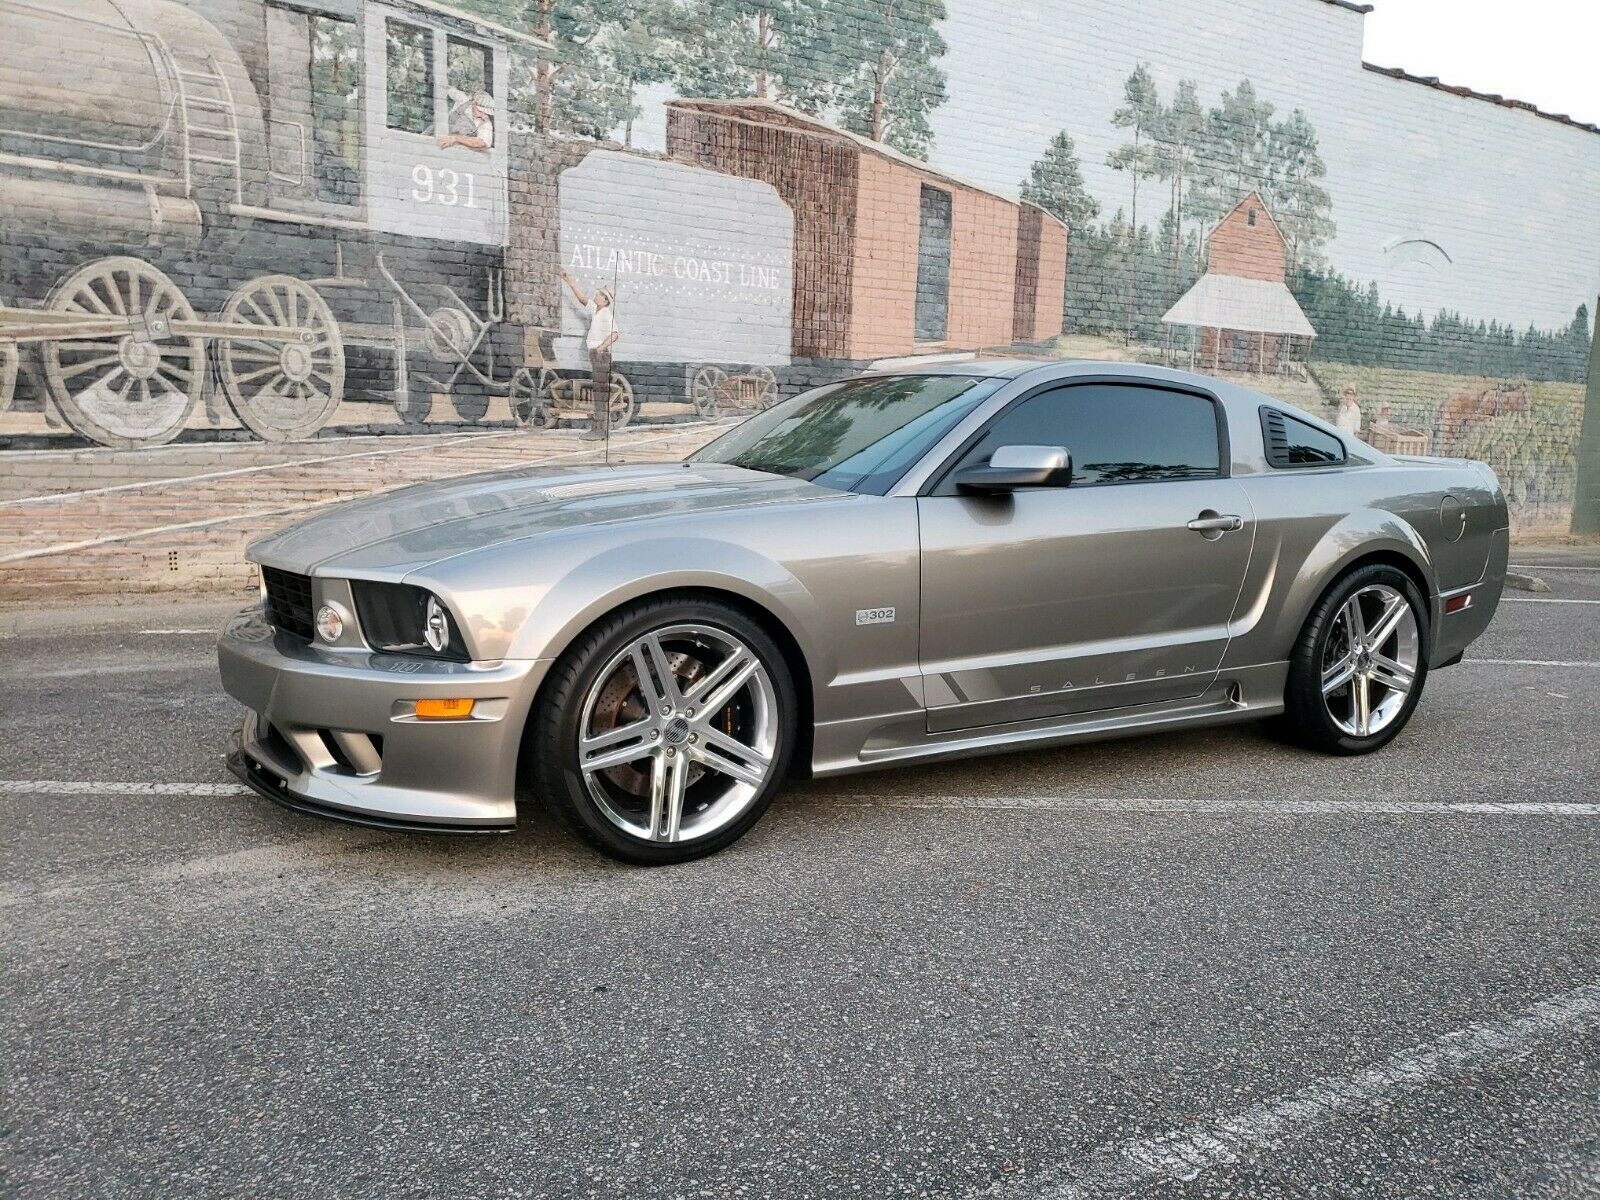 Mustang Of The Day: 2008 Saleen SA-25 Sterling Edition Mustang